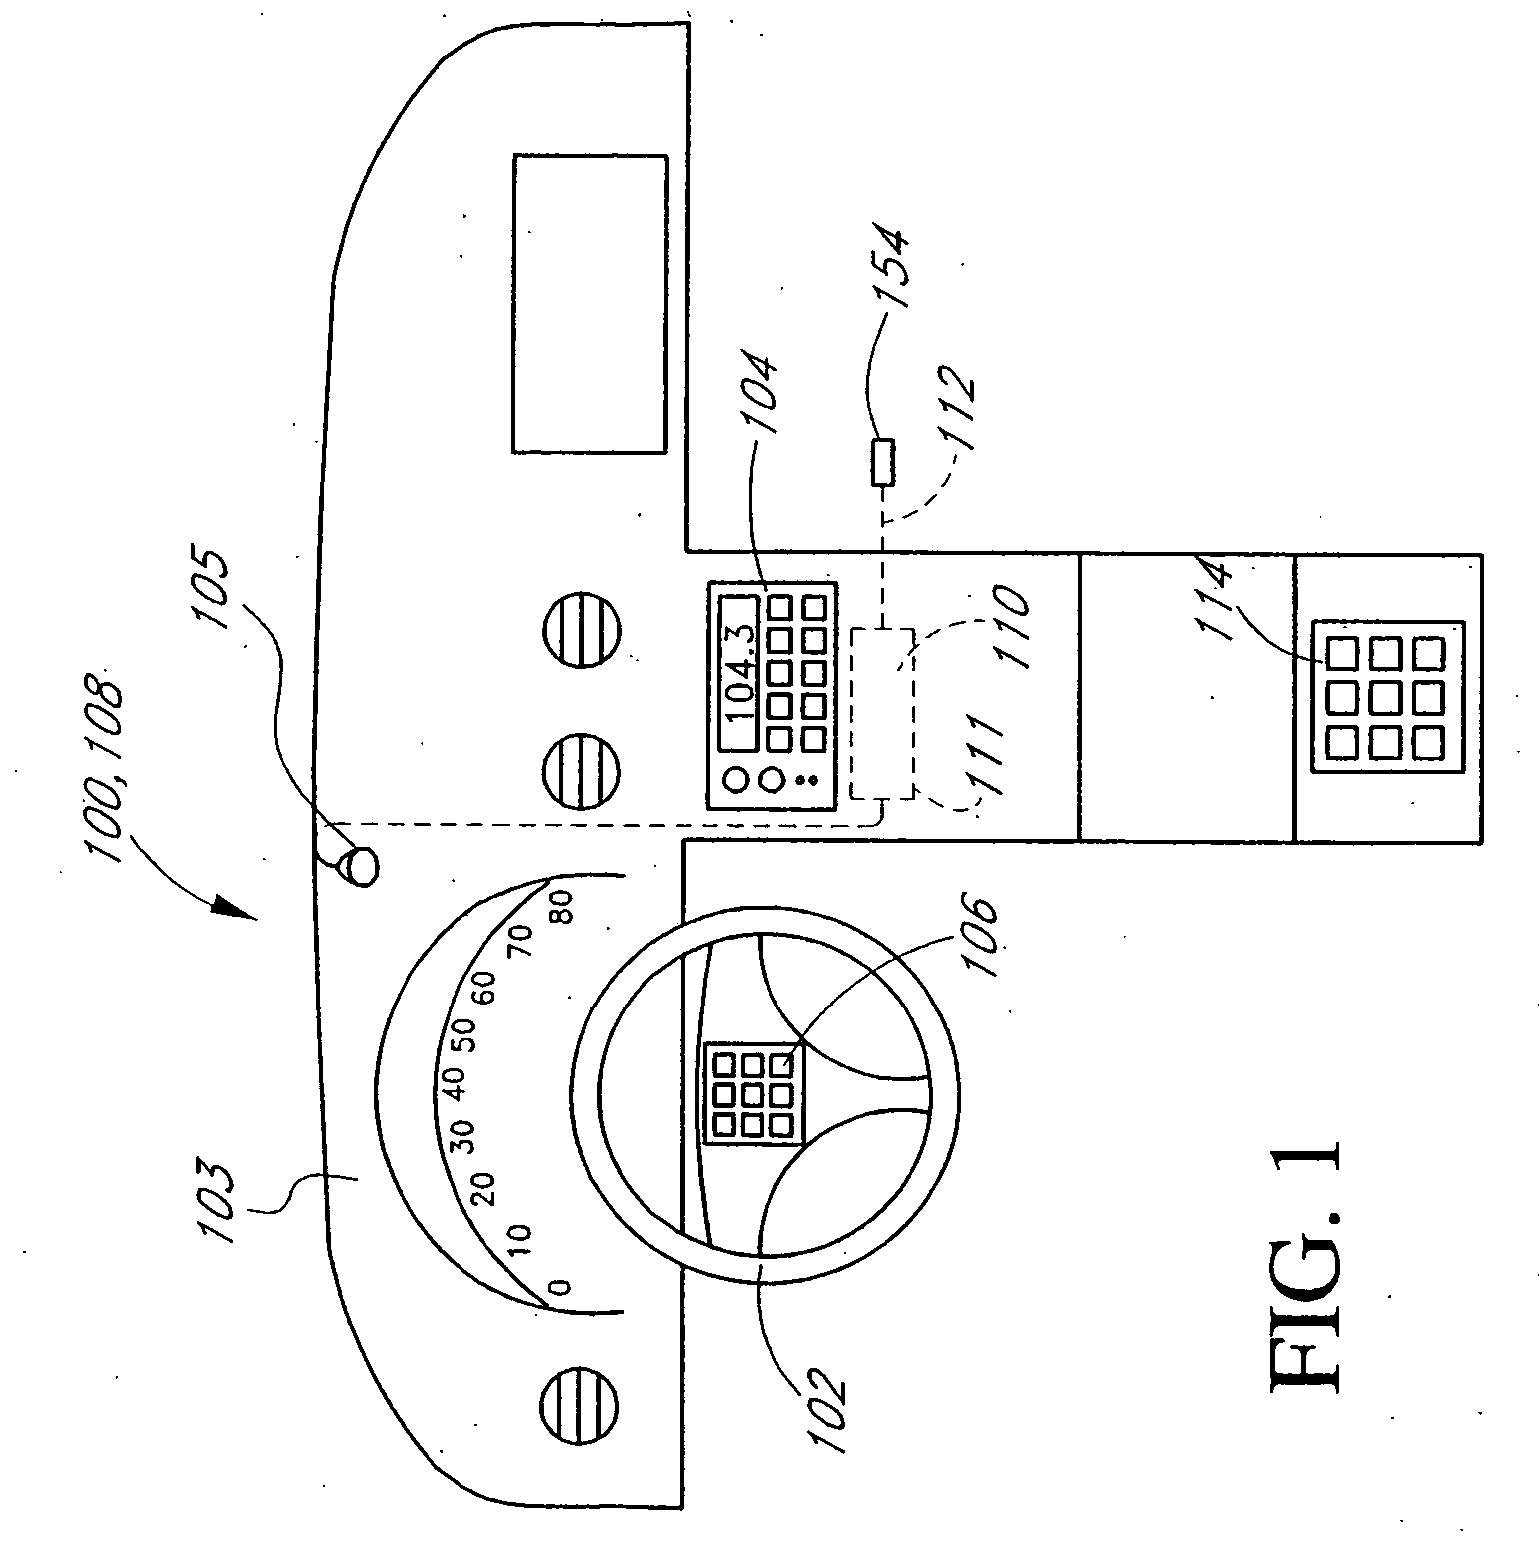 Vehicle remote control interface for controlling multiple electronic devices